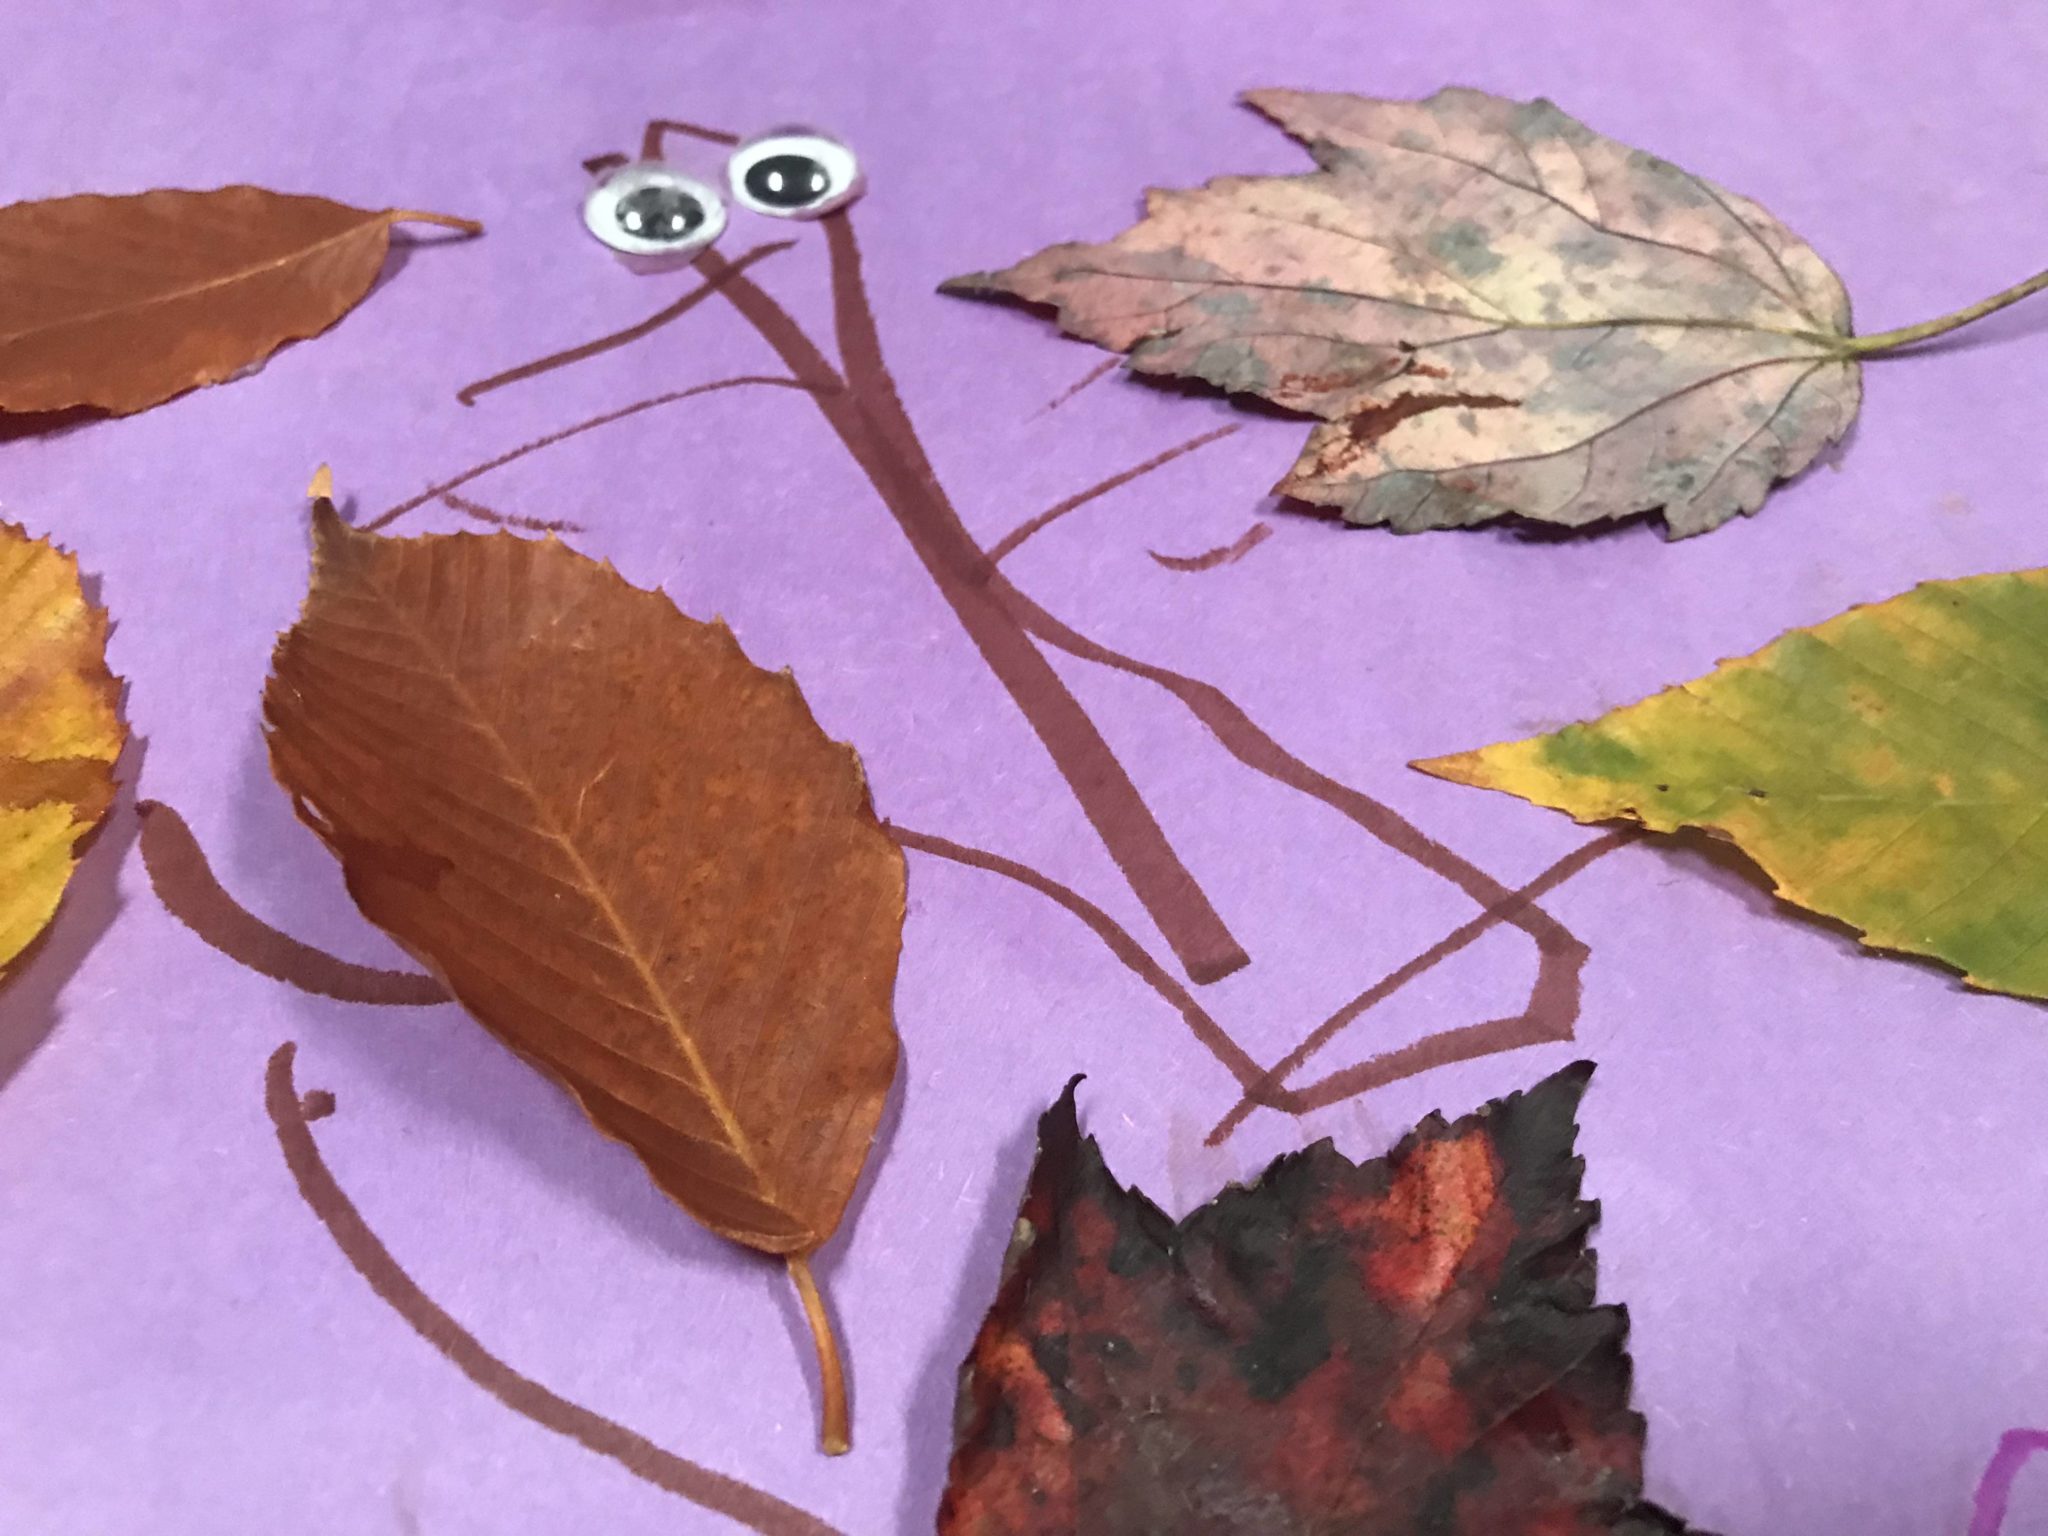 Leaf creation ideas to play with your kids